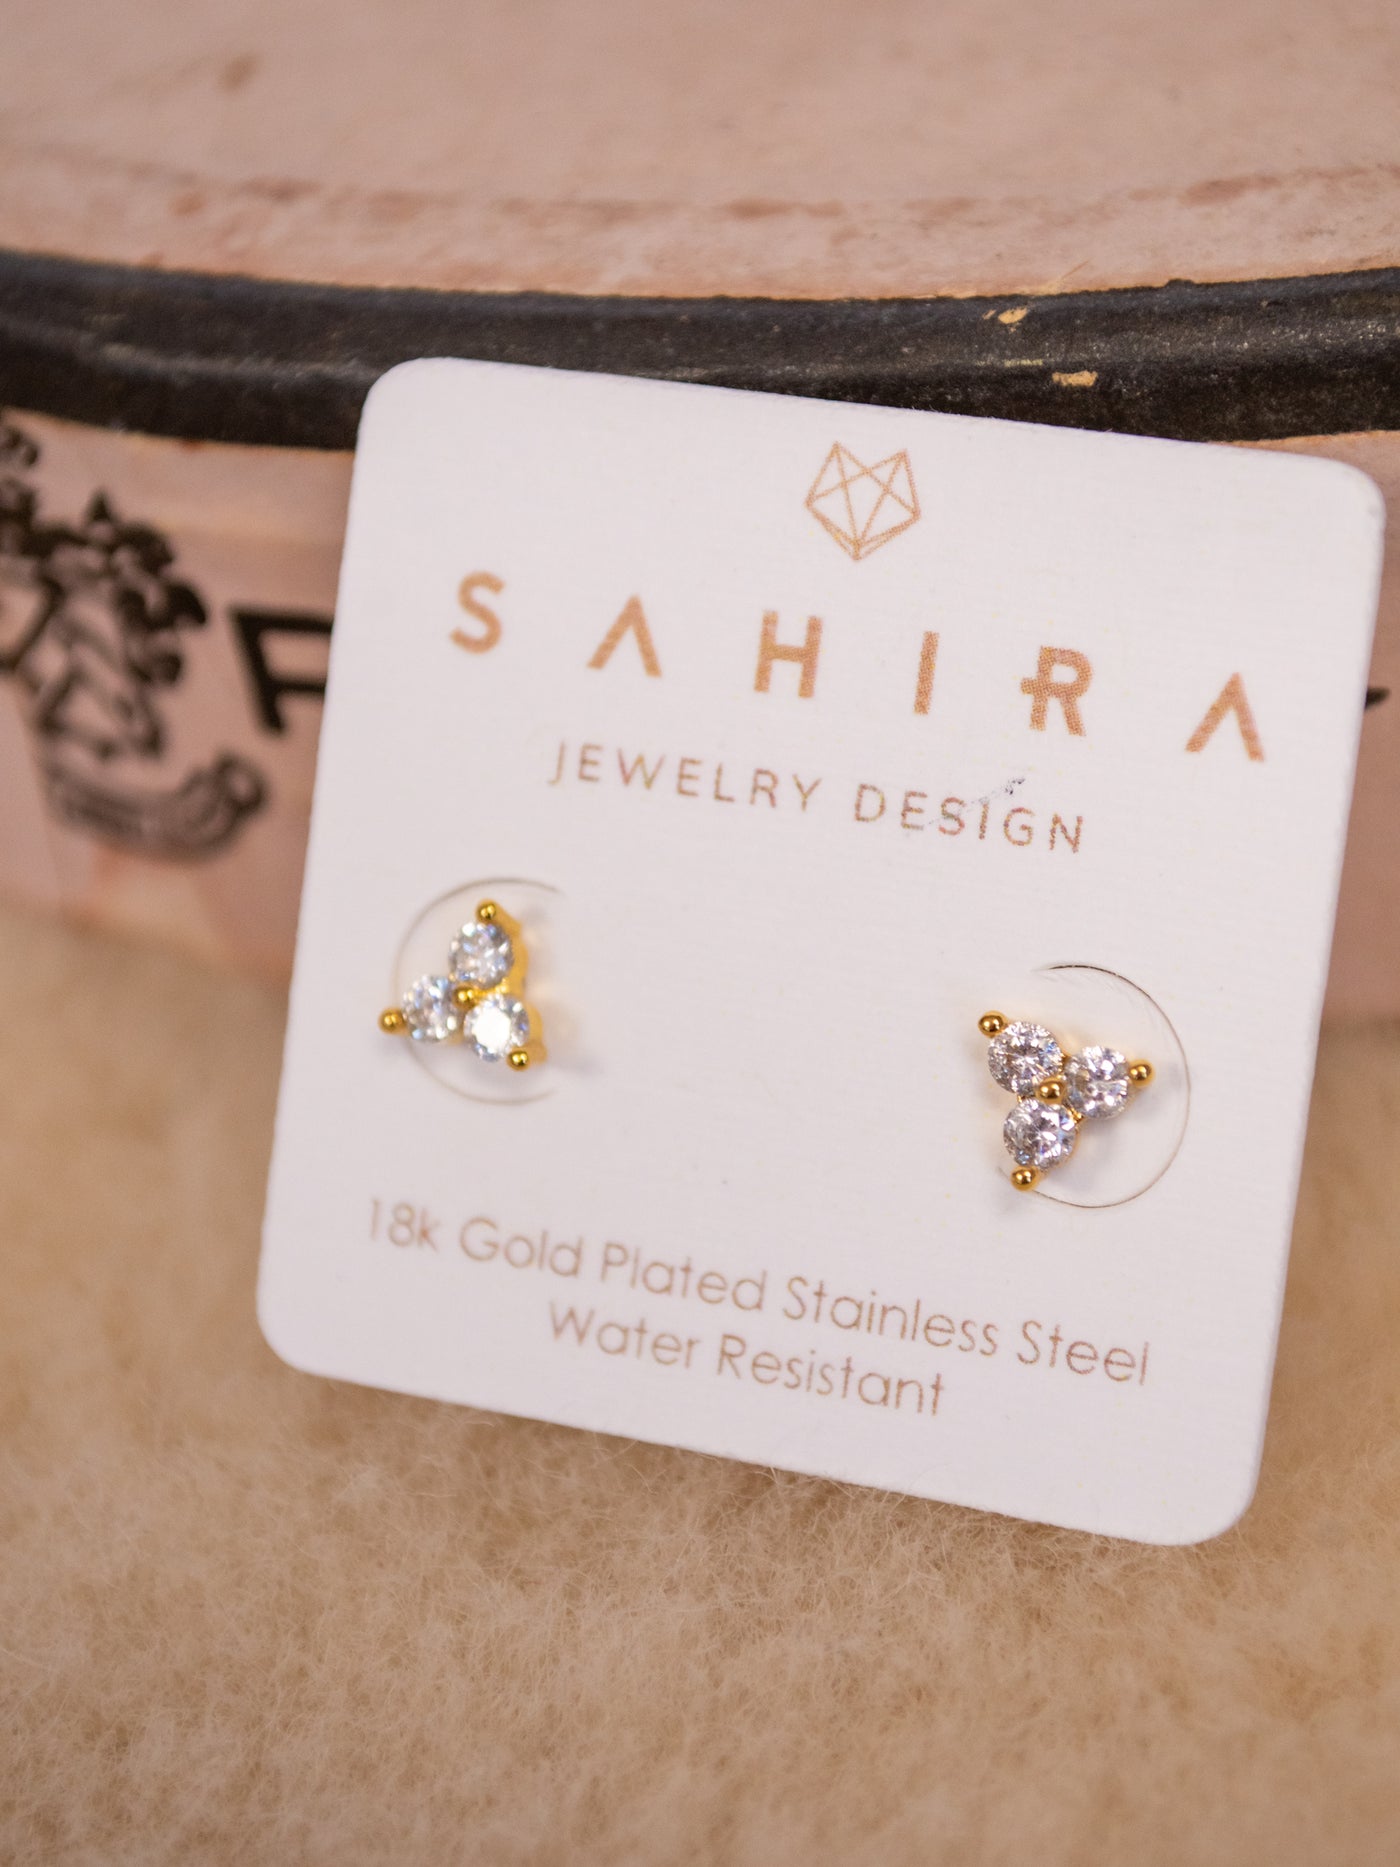 A pair of gold stud earrings with three CZ stones on them.